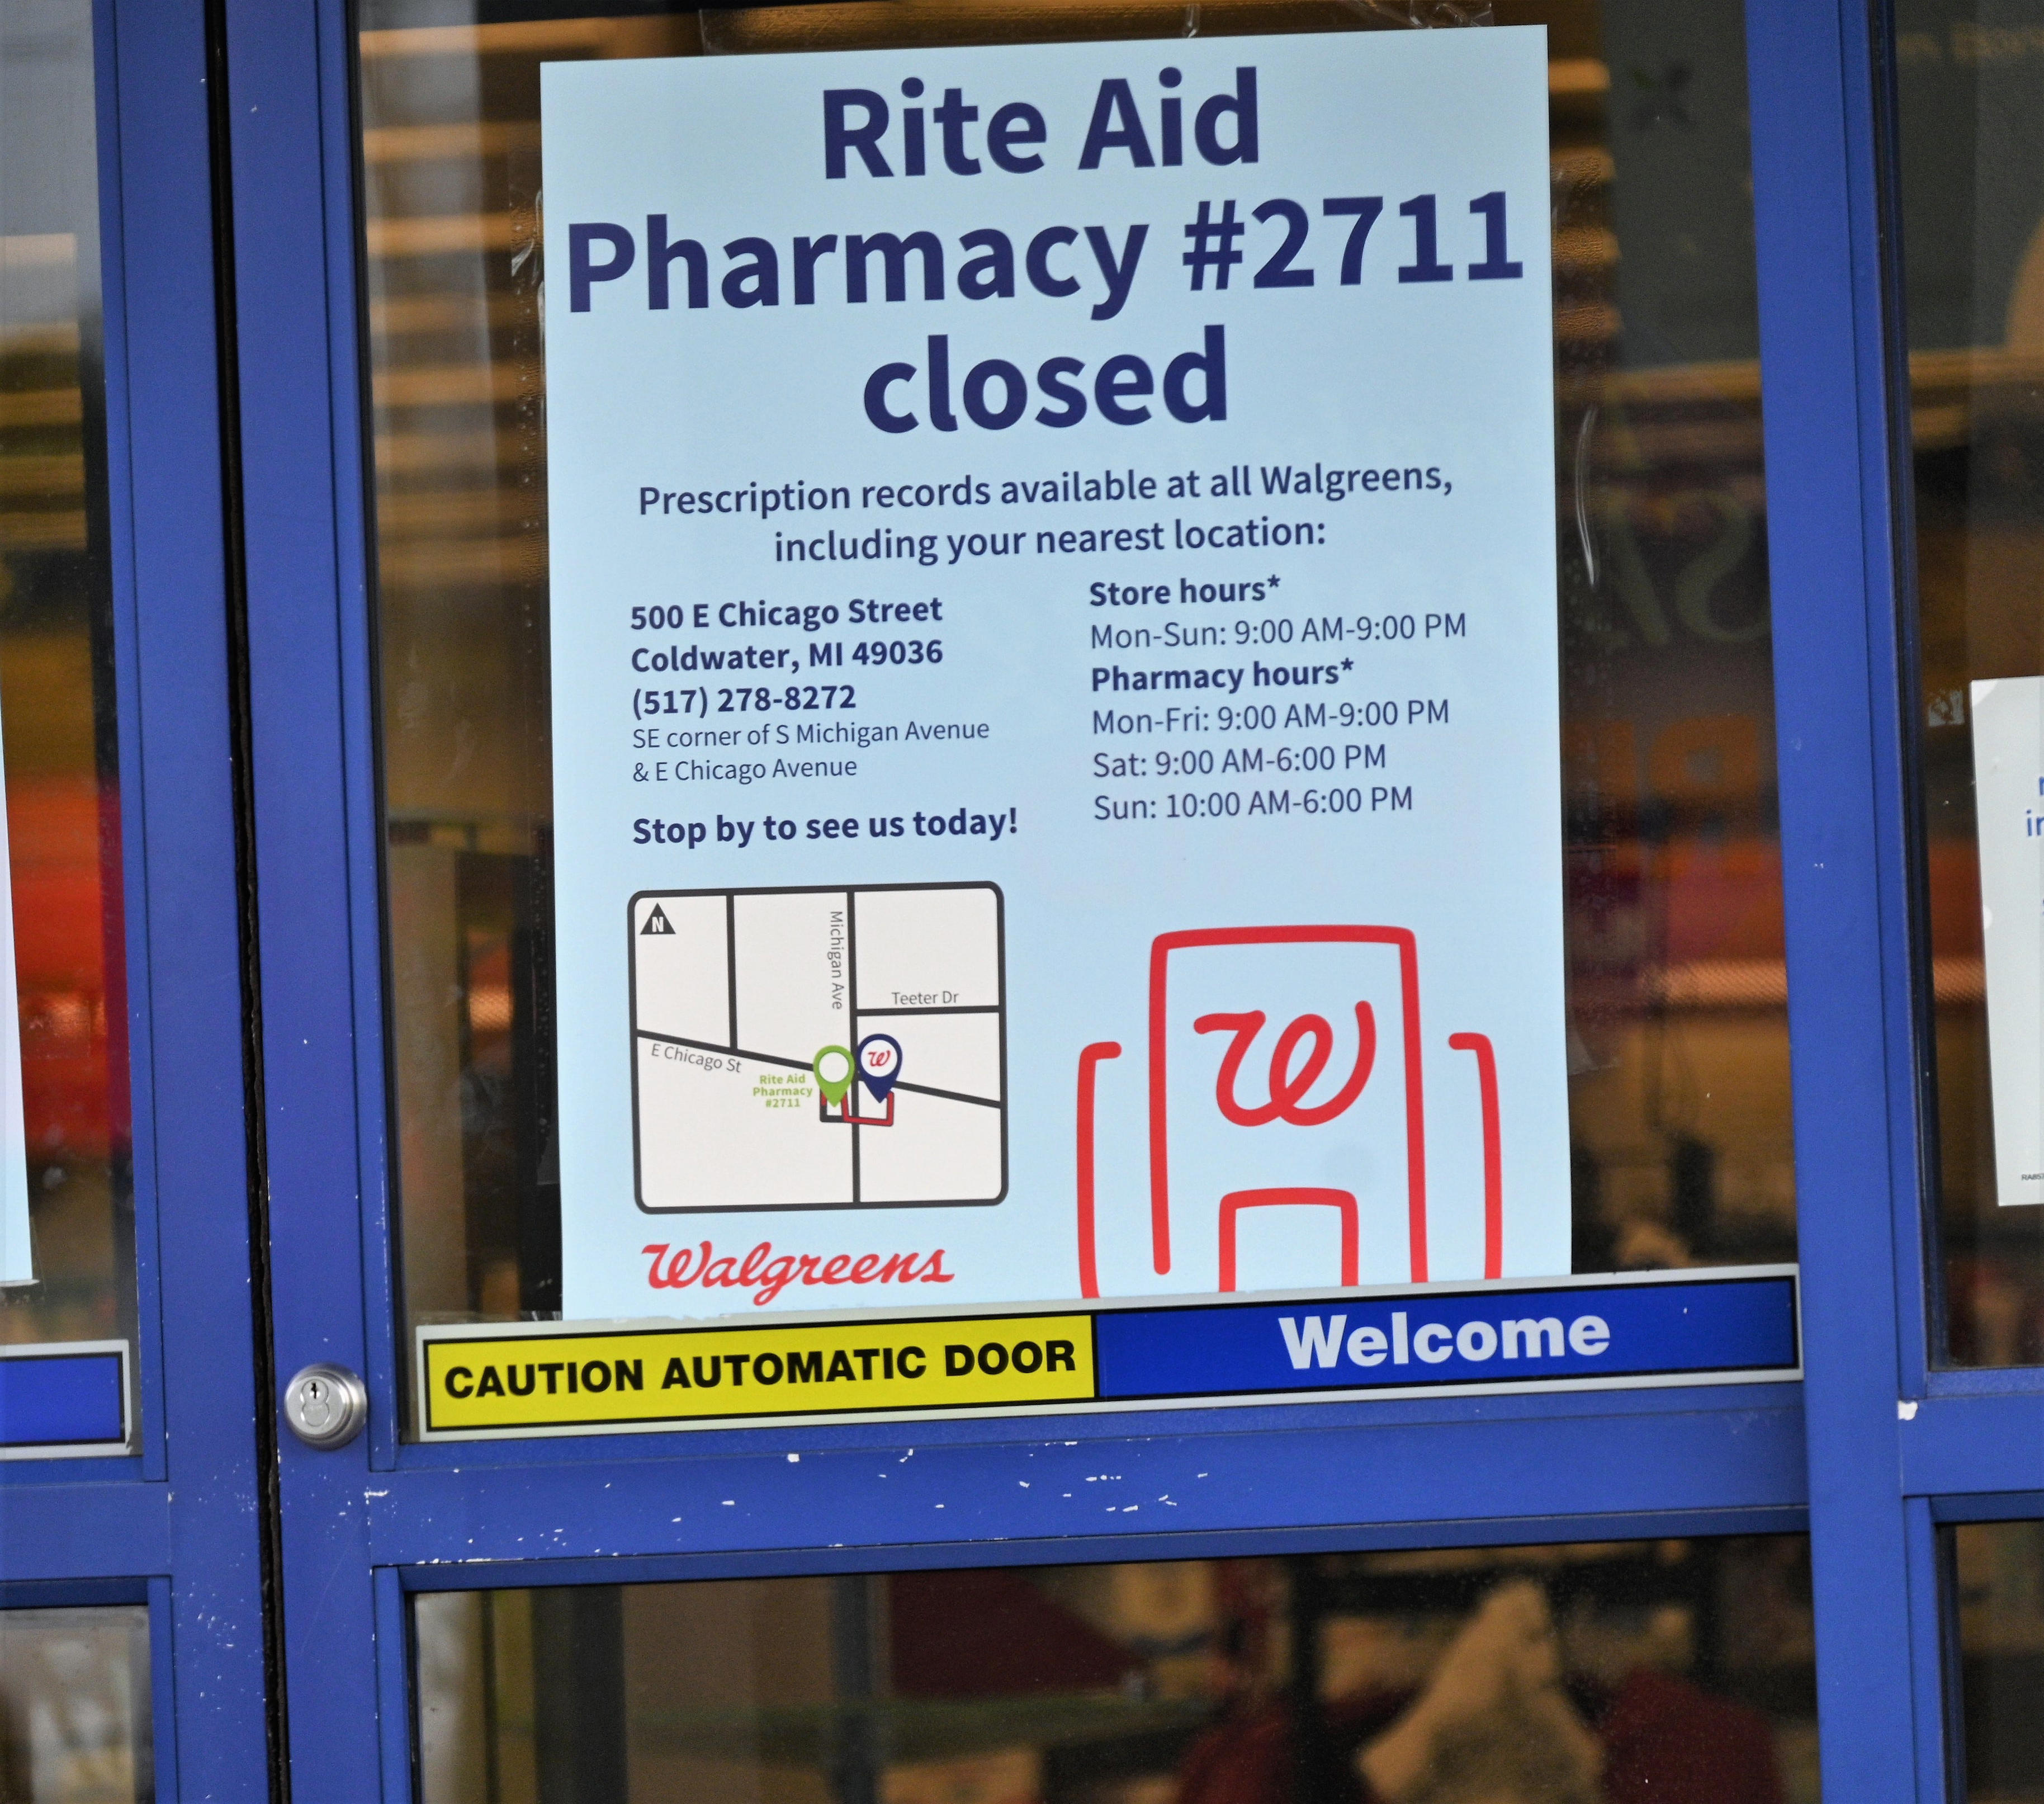 rite aid closing more locations: 31 additional stores to be shuttered.